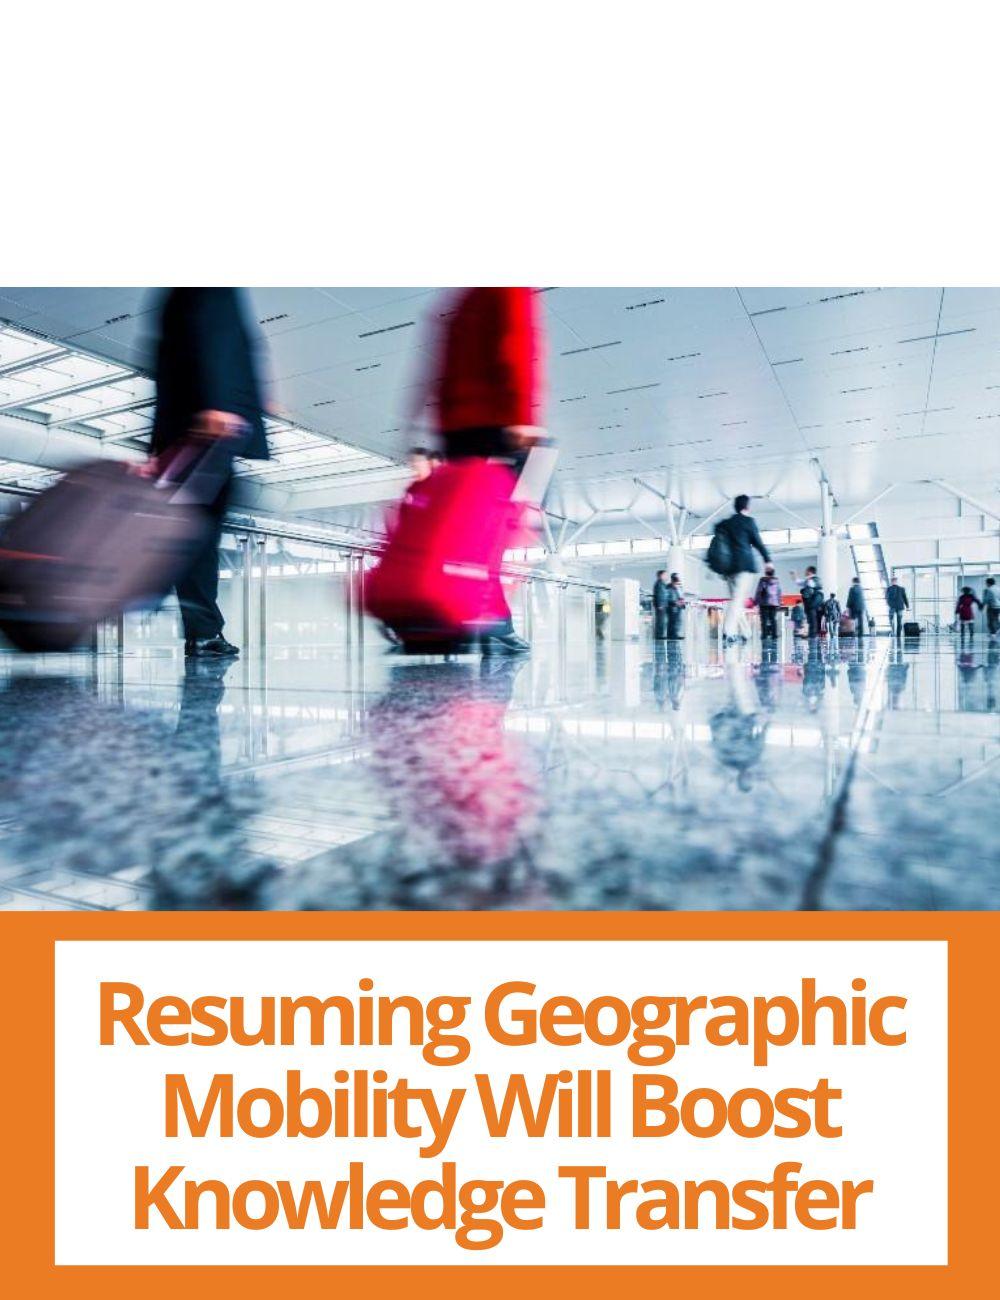 Link to related stories. Image: people walking with luggages. Story headline: Resuming Geographic Mobility Will Boost Knowledge Transfer